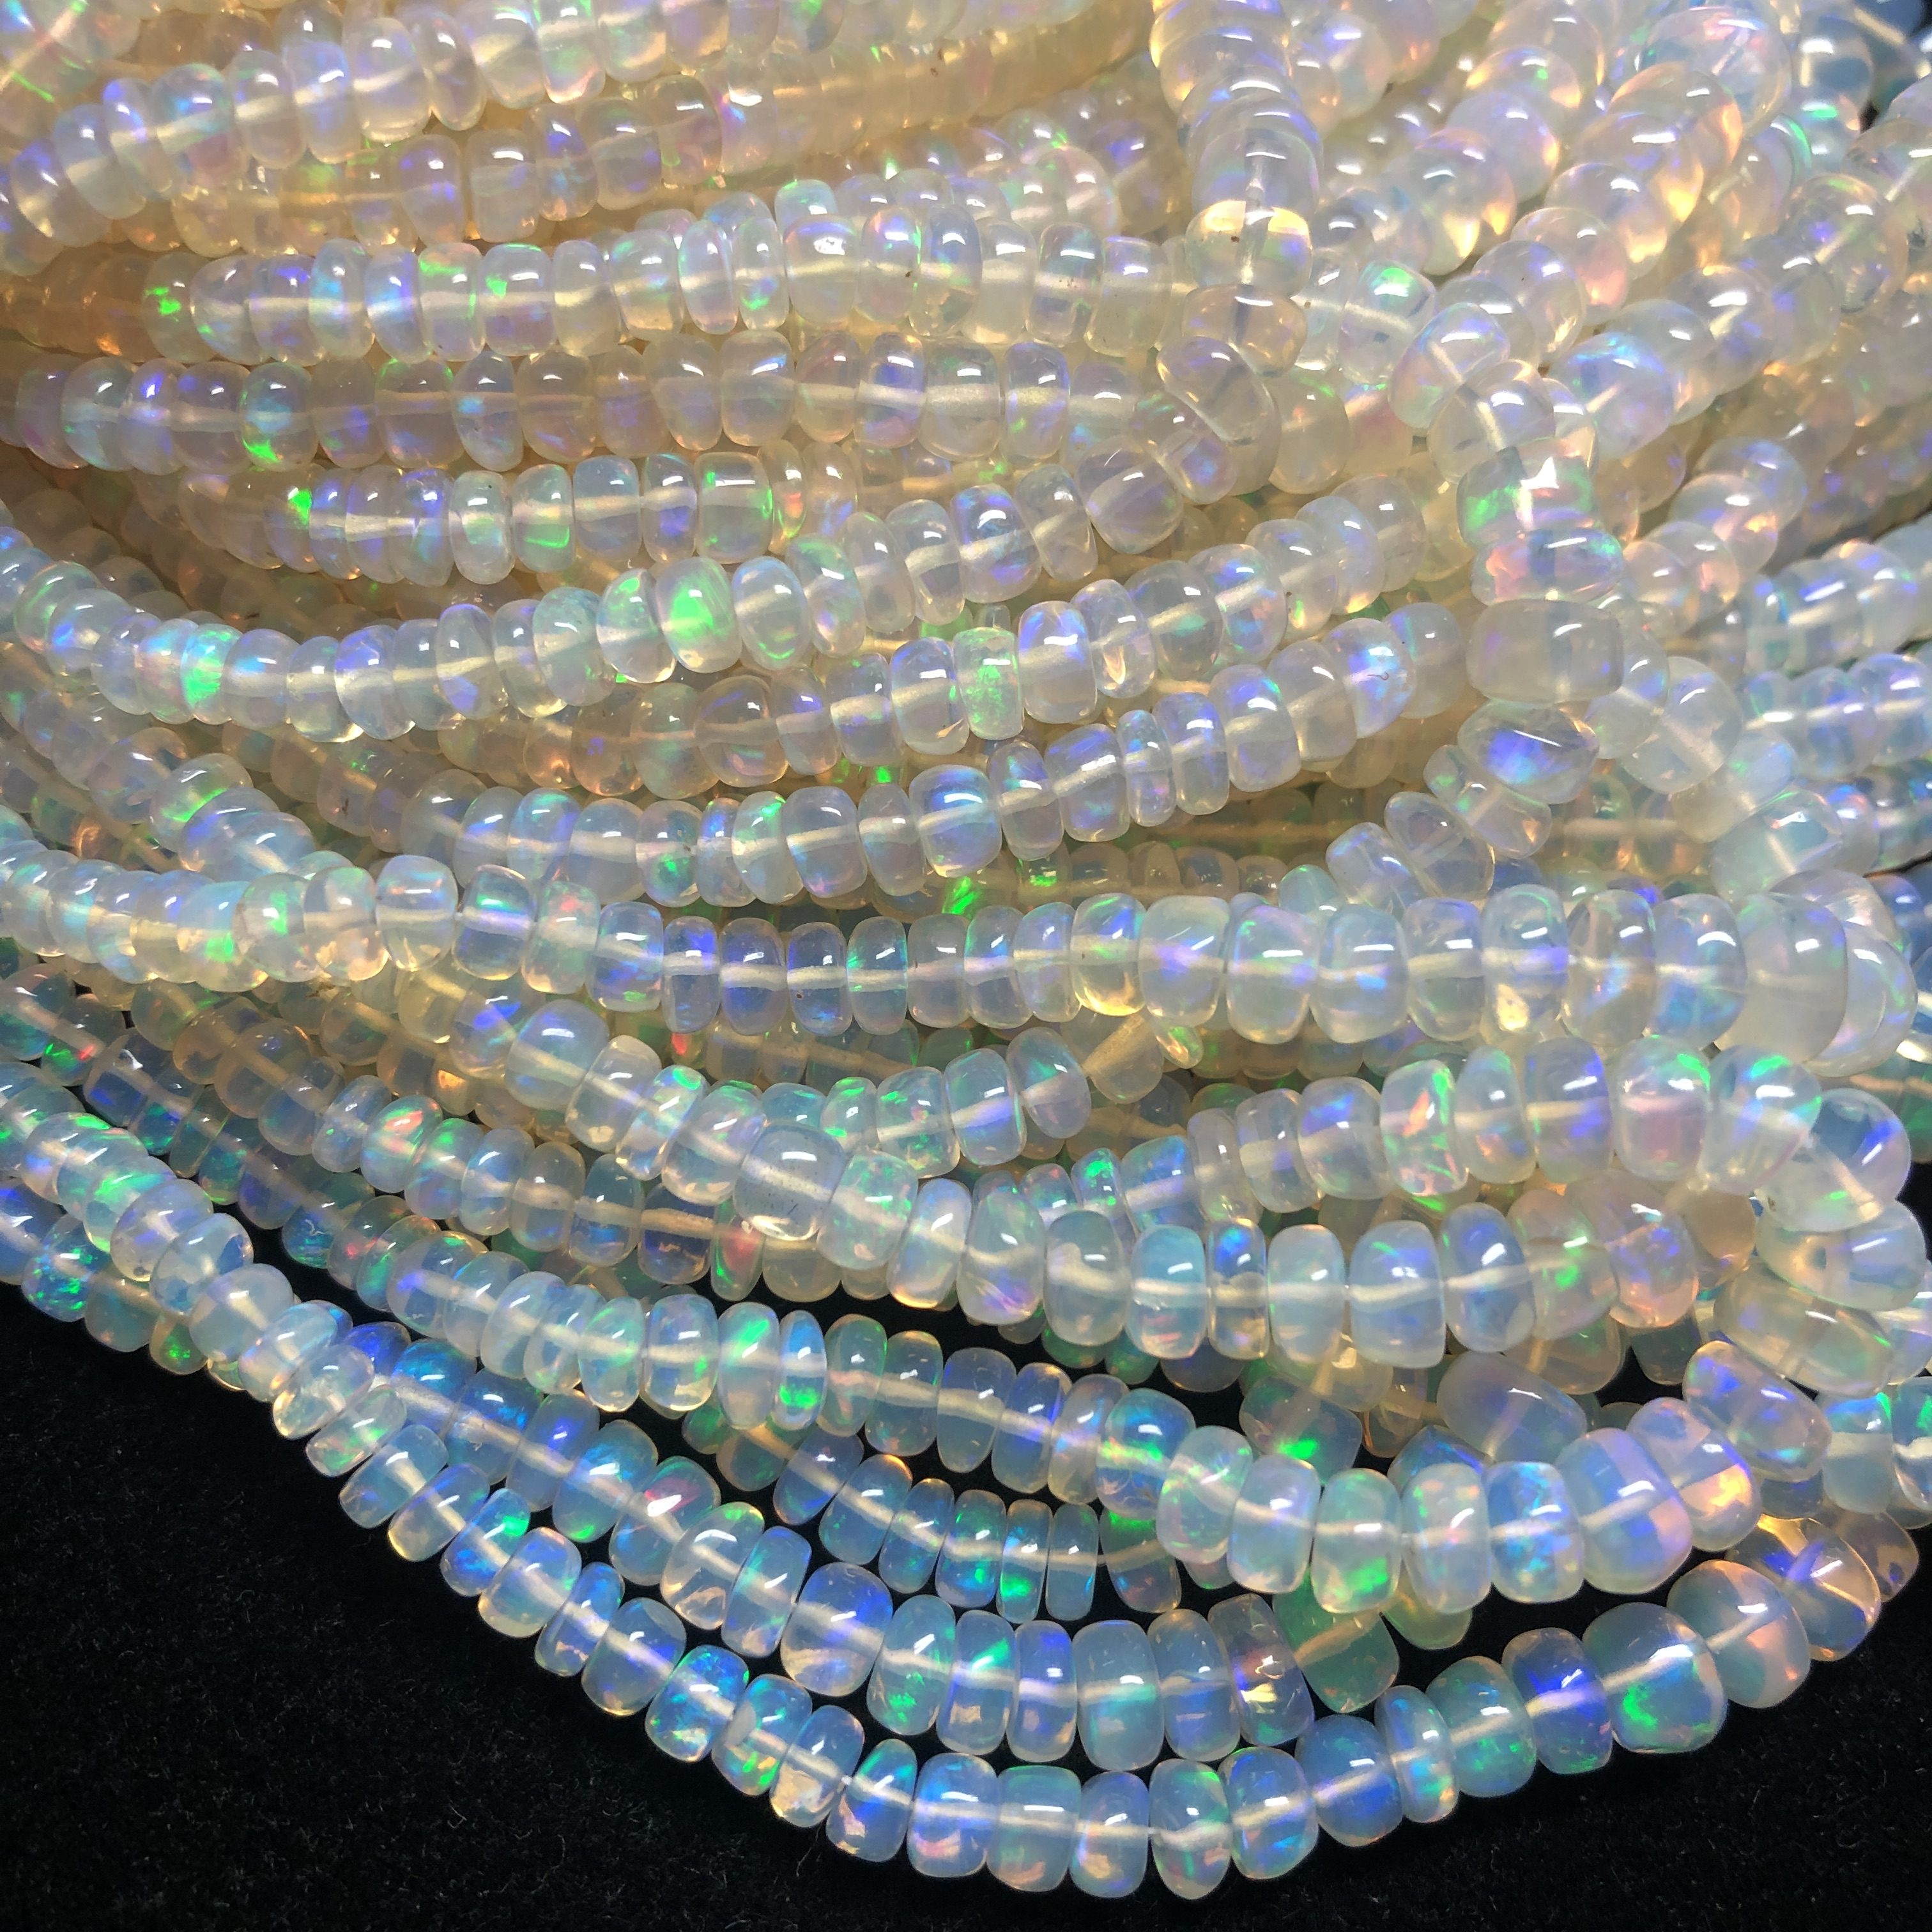 6mm Rondelle Ethiopian Opal beads 16 string Count 114 total